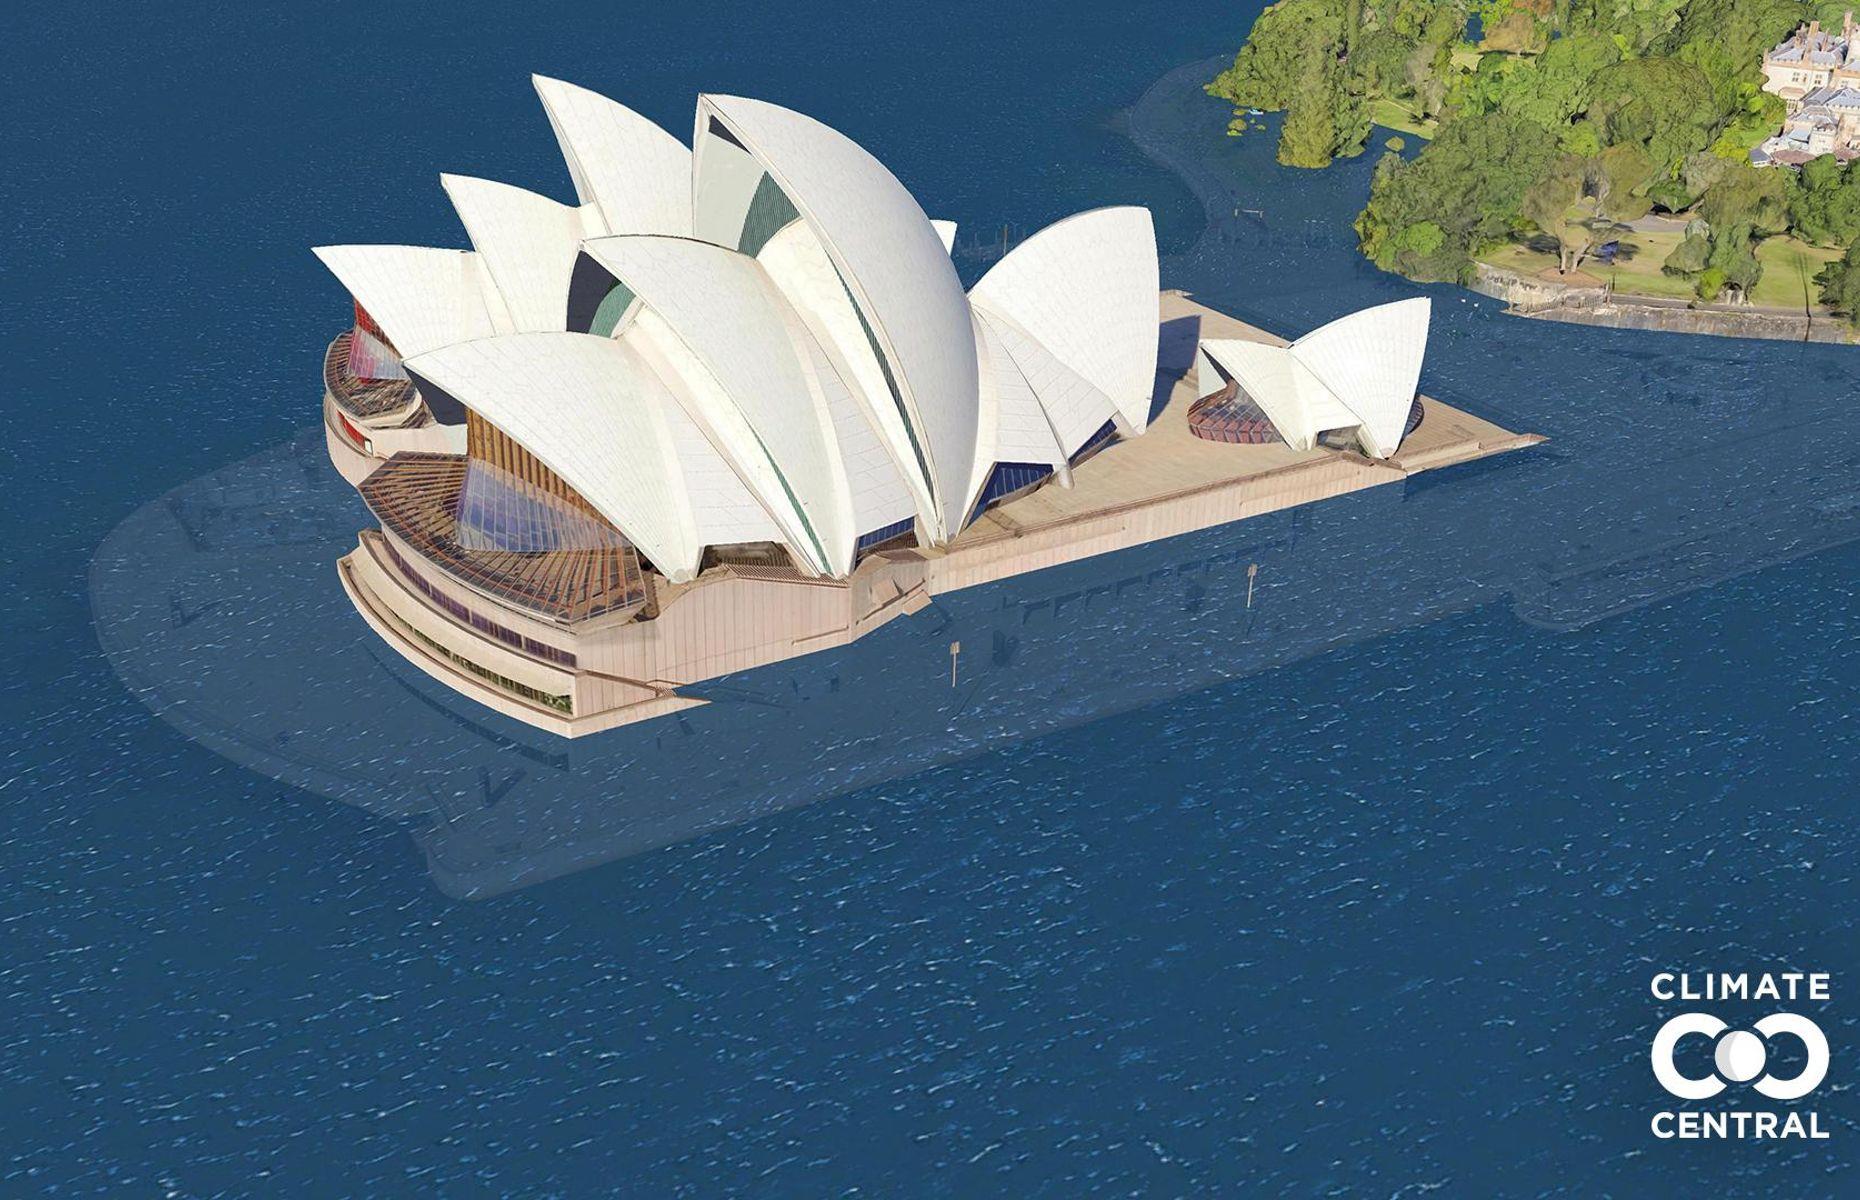 A world-famous landmark along Sydney Harbour, the Sydney Opera House looks a sorry state with the lower levels of the building subsumed underwater in this image. But that’s exactly what will happen if climate change continues along its current trajectory.